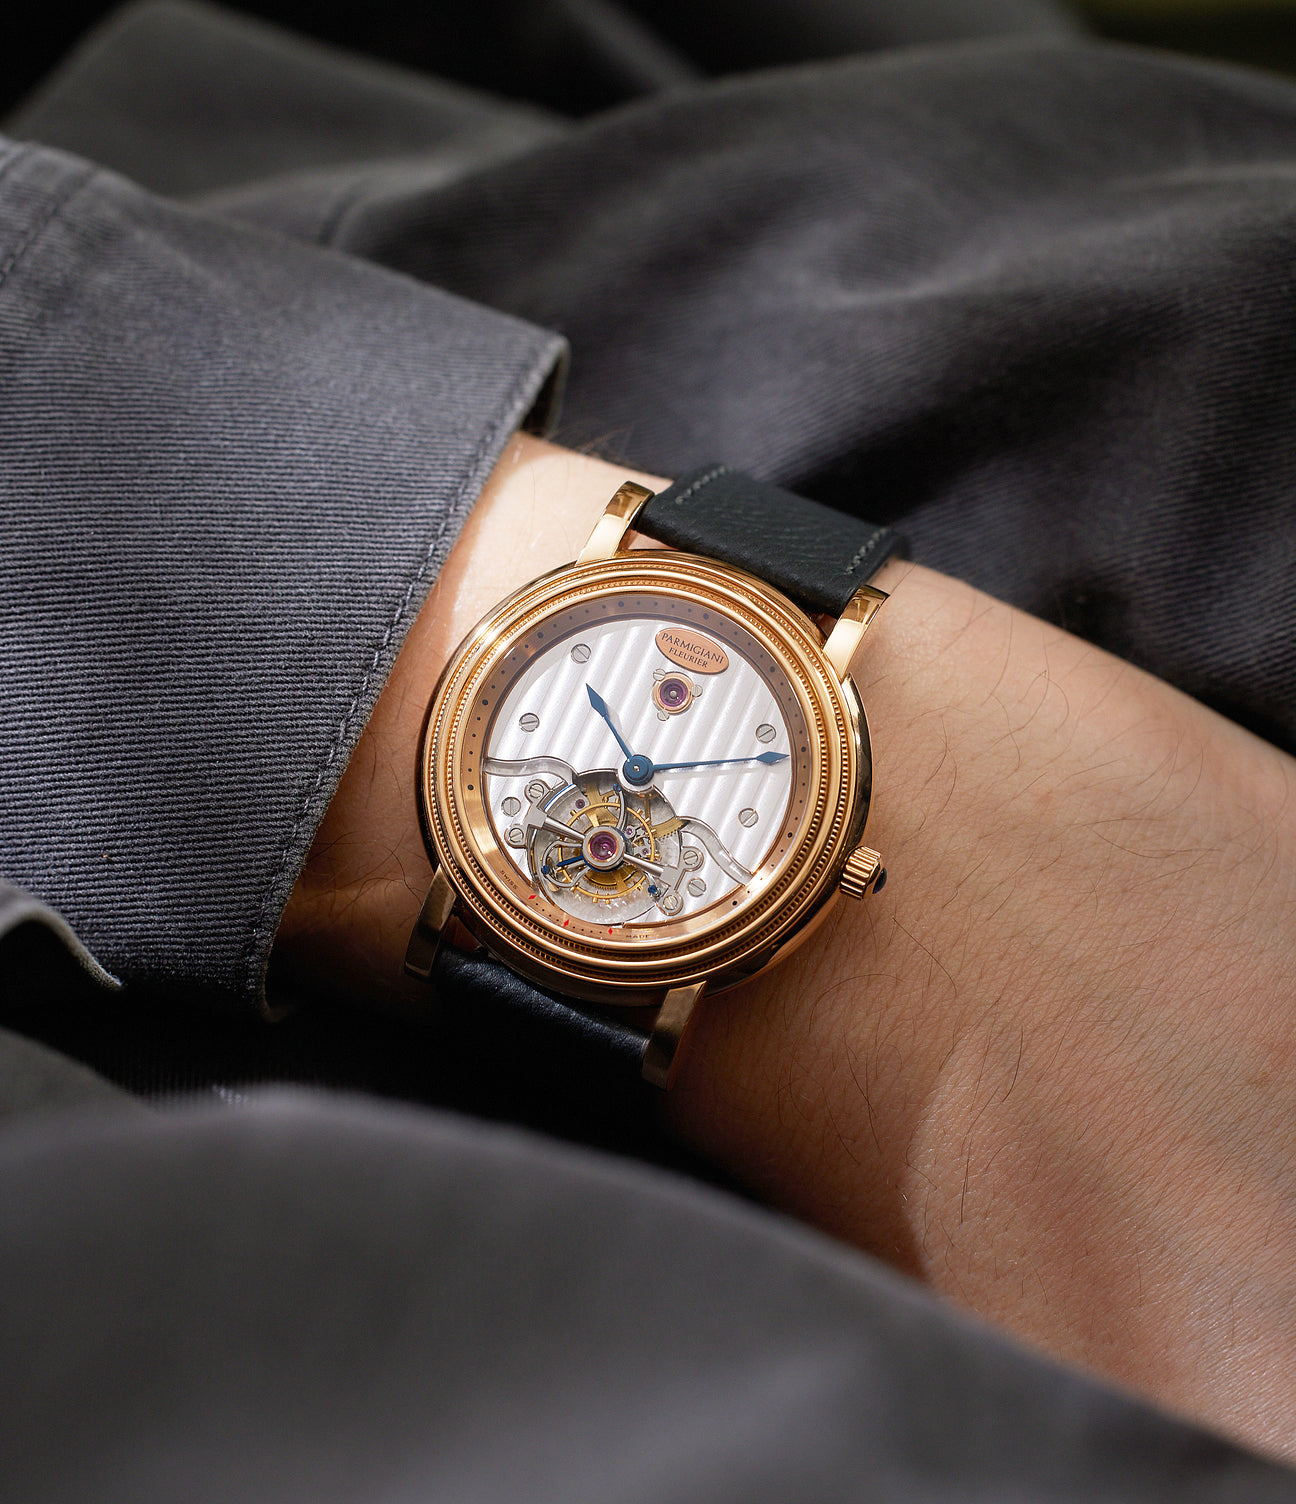 Exciting Insider News: Vaucher and Parmigiani Fleurier Up for Sale!